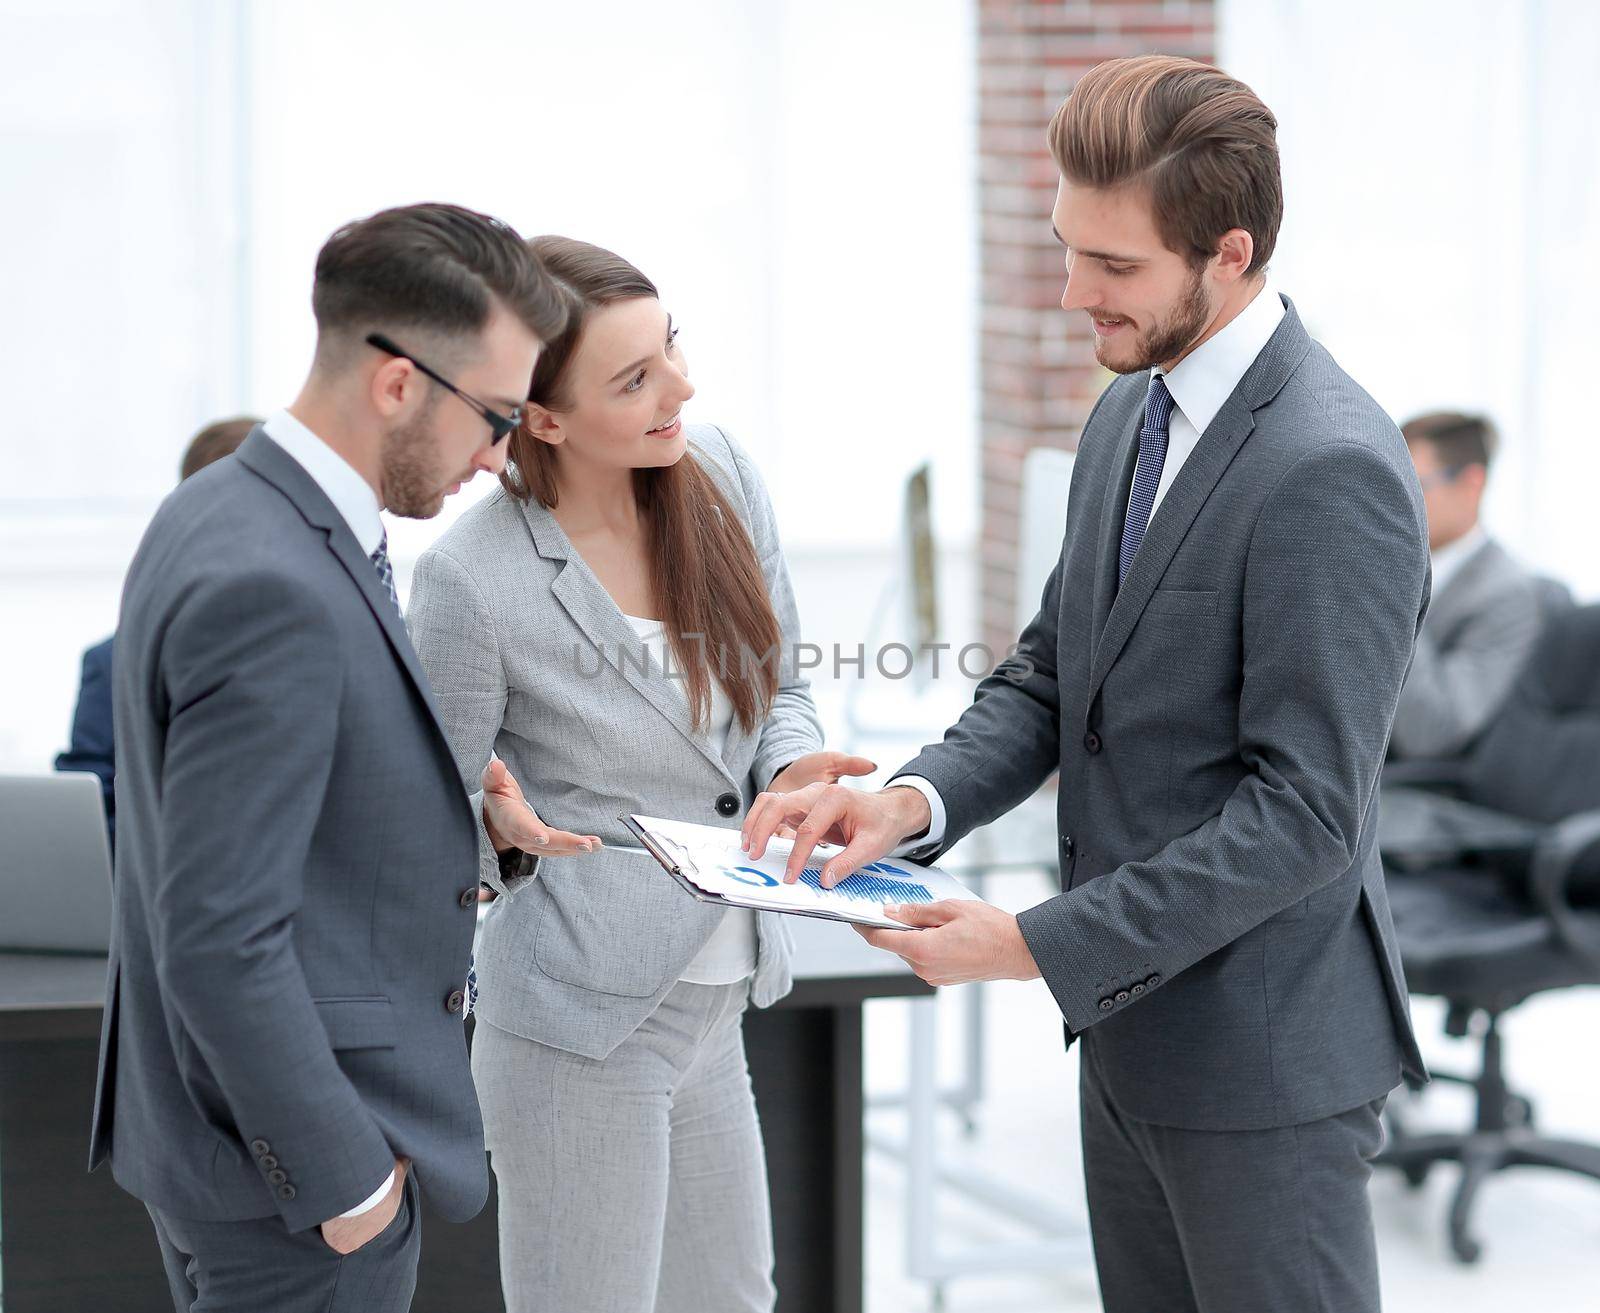 Business woman showing diagram and explaining information to entrepreneur